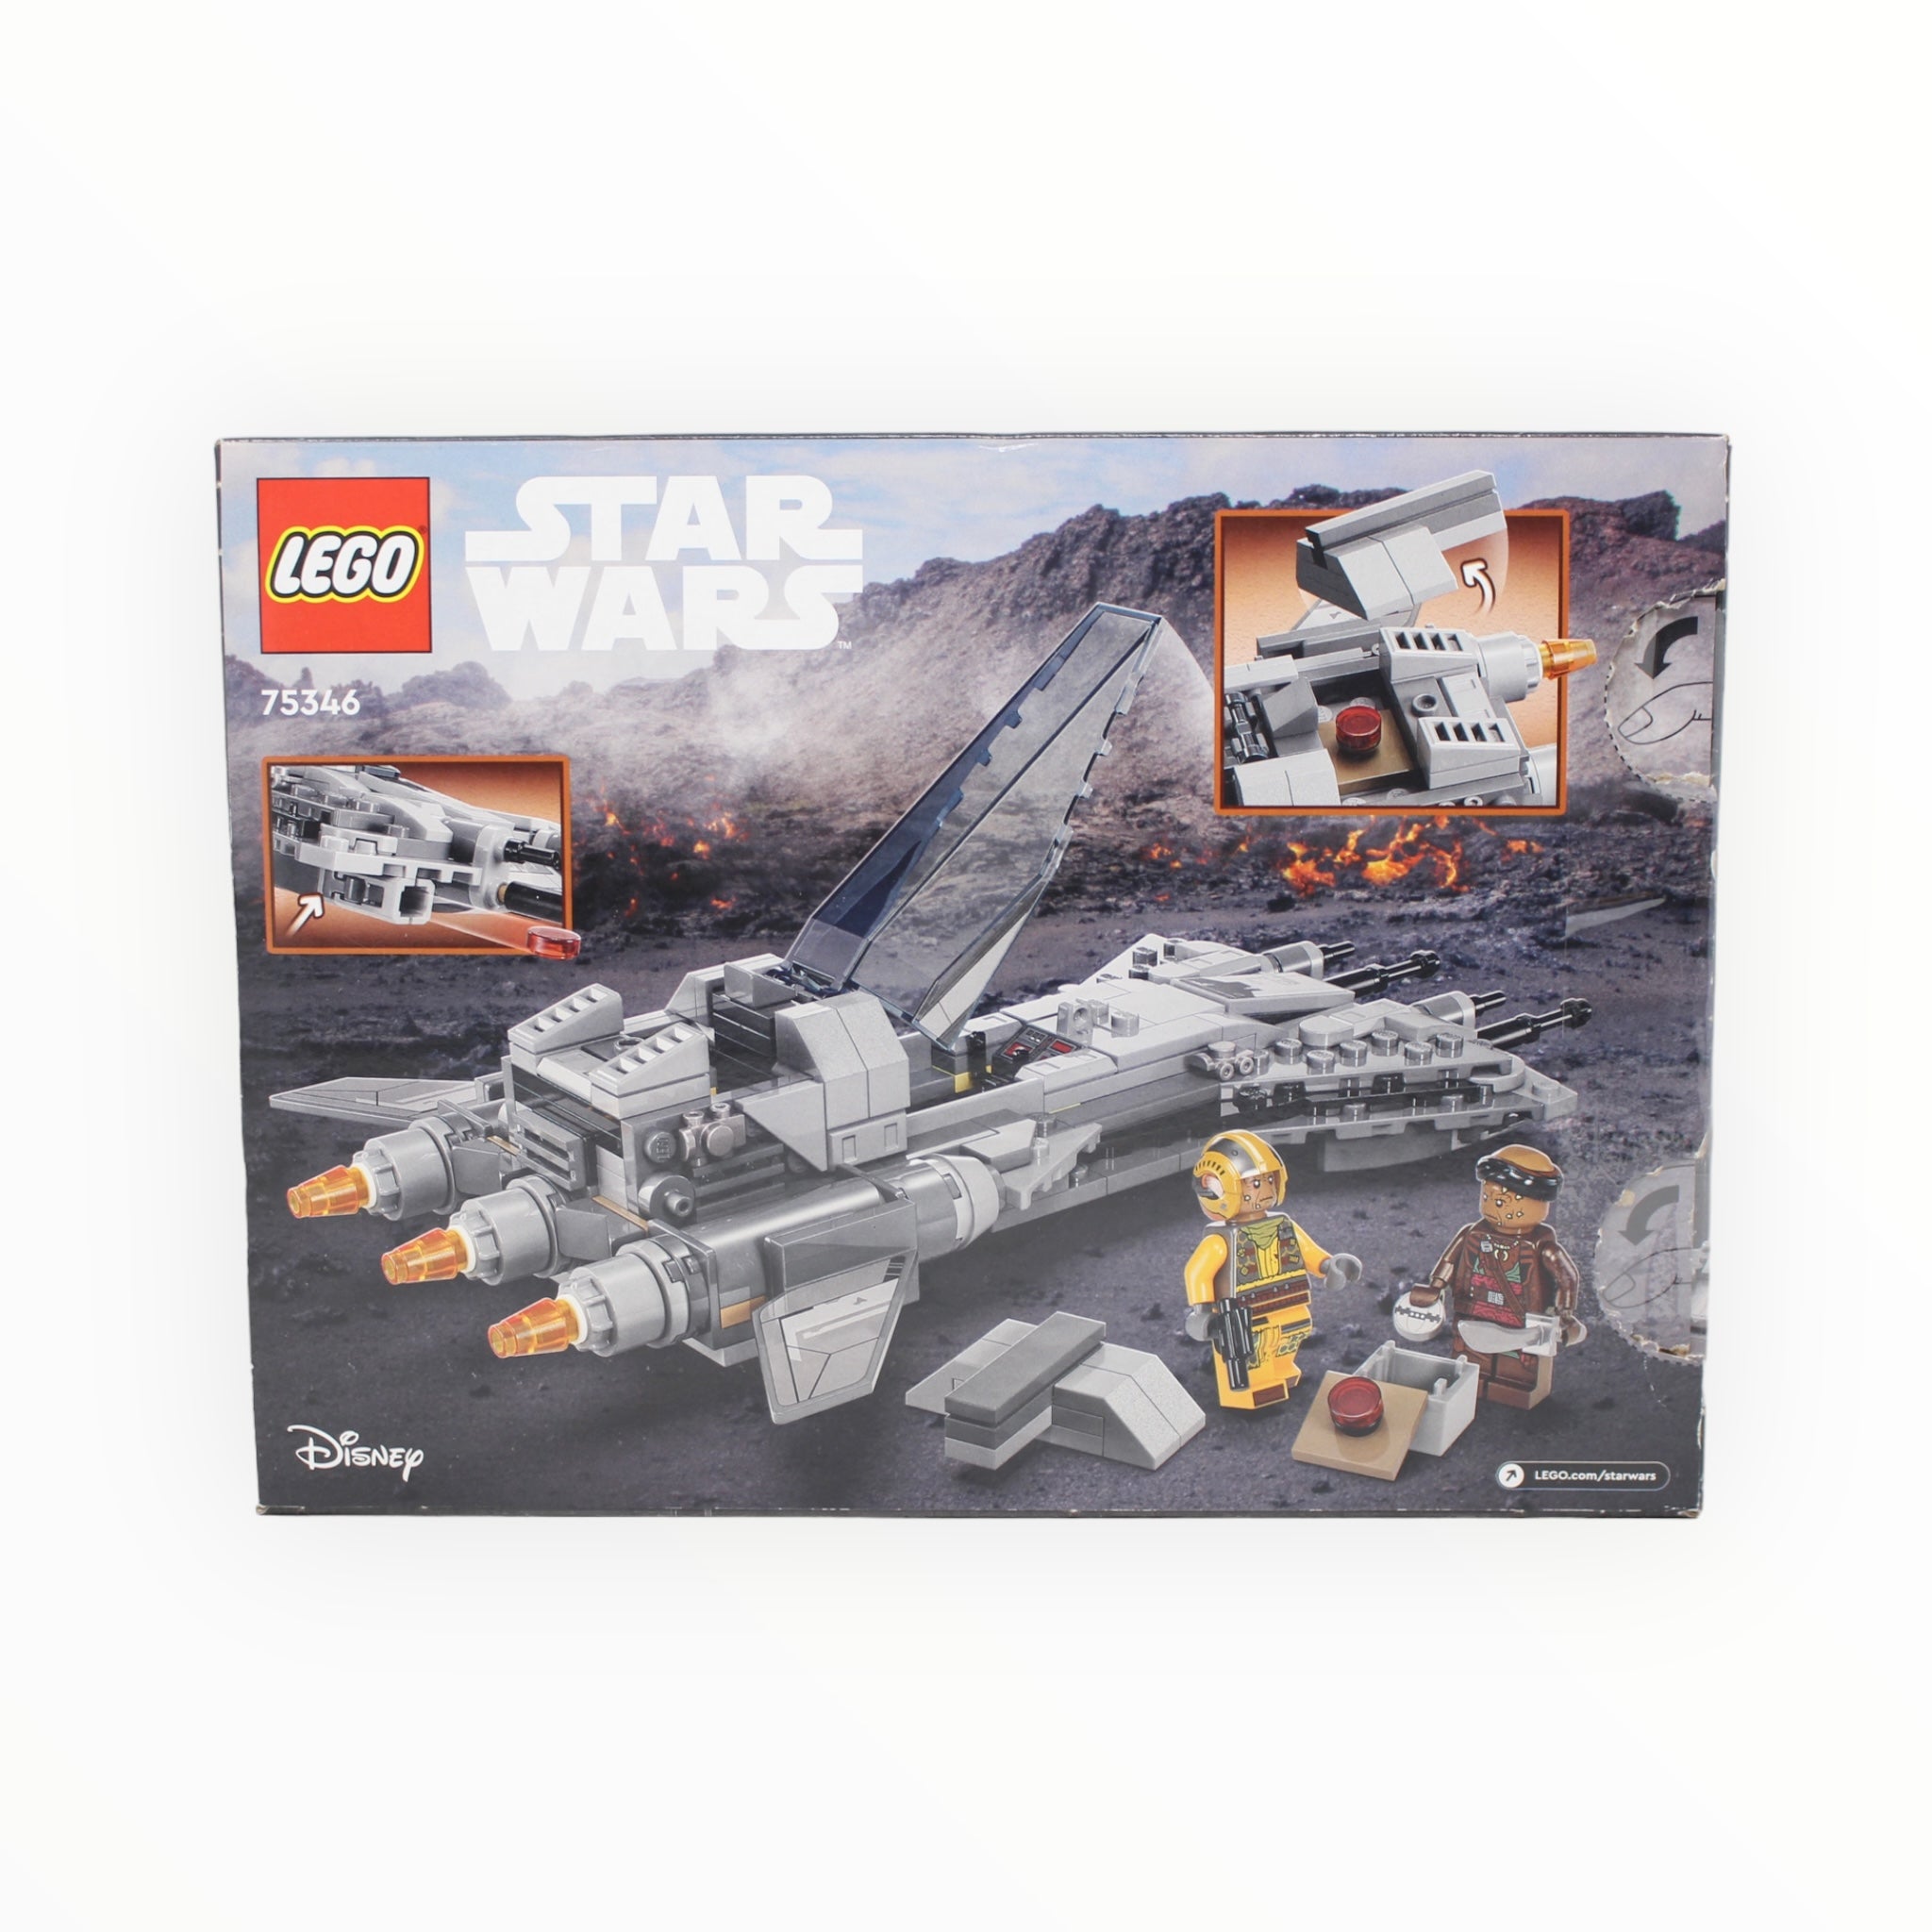 Certified Used Set 75346 Star Wars Pirate Snub Fighter